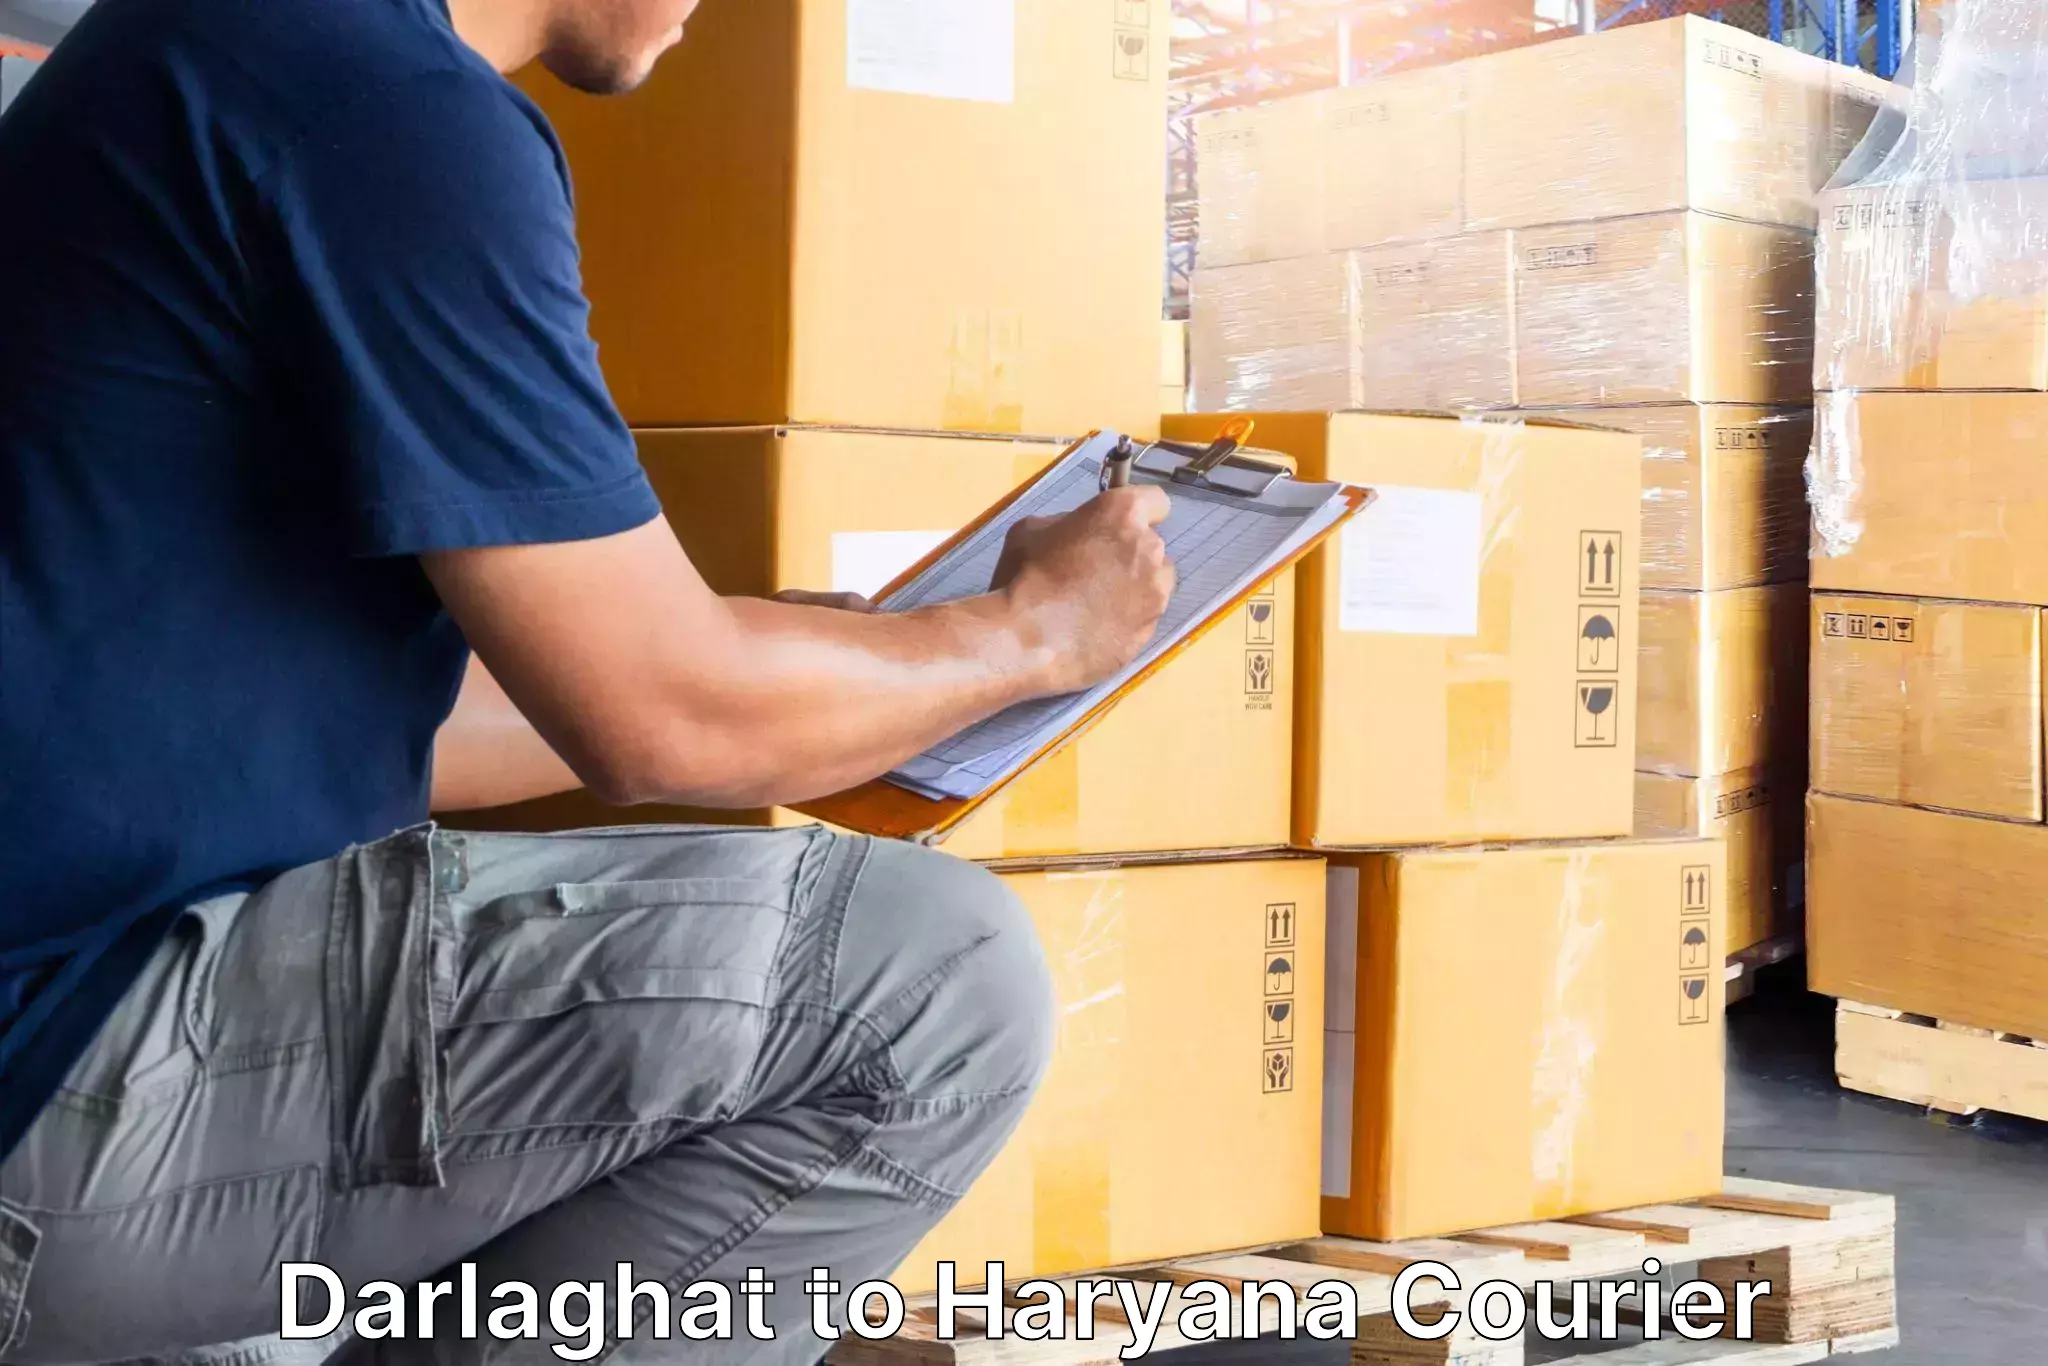 Home relocation experts Darlaghat to NCR Haryana